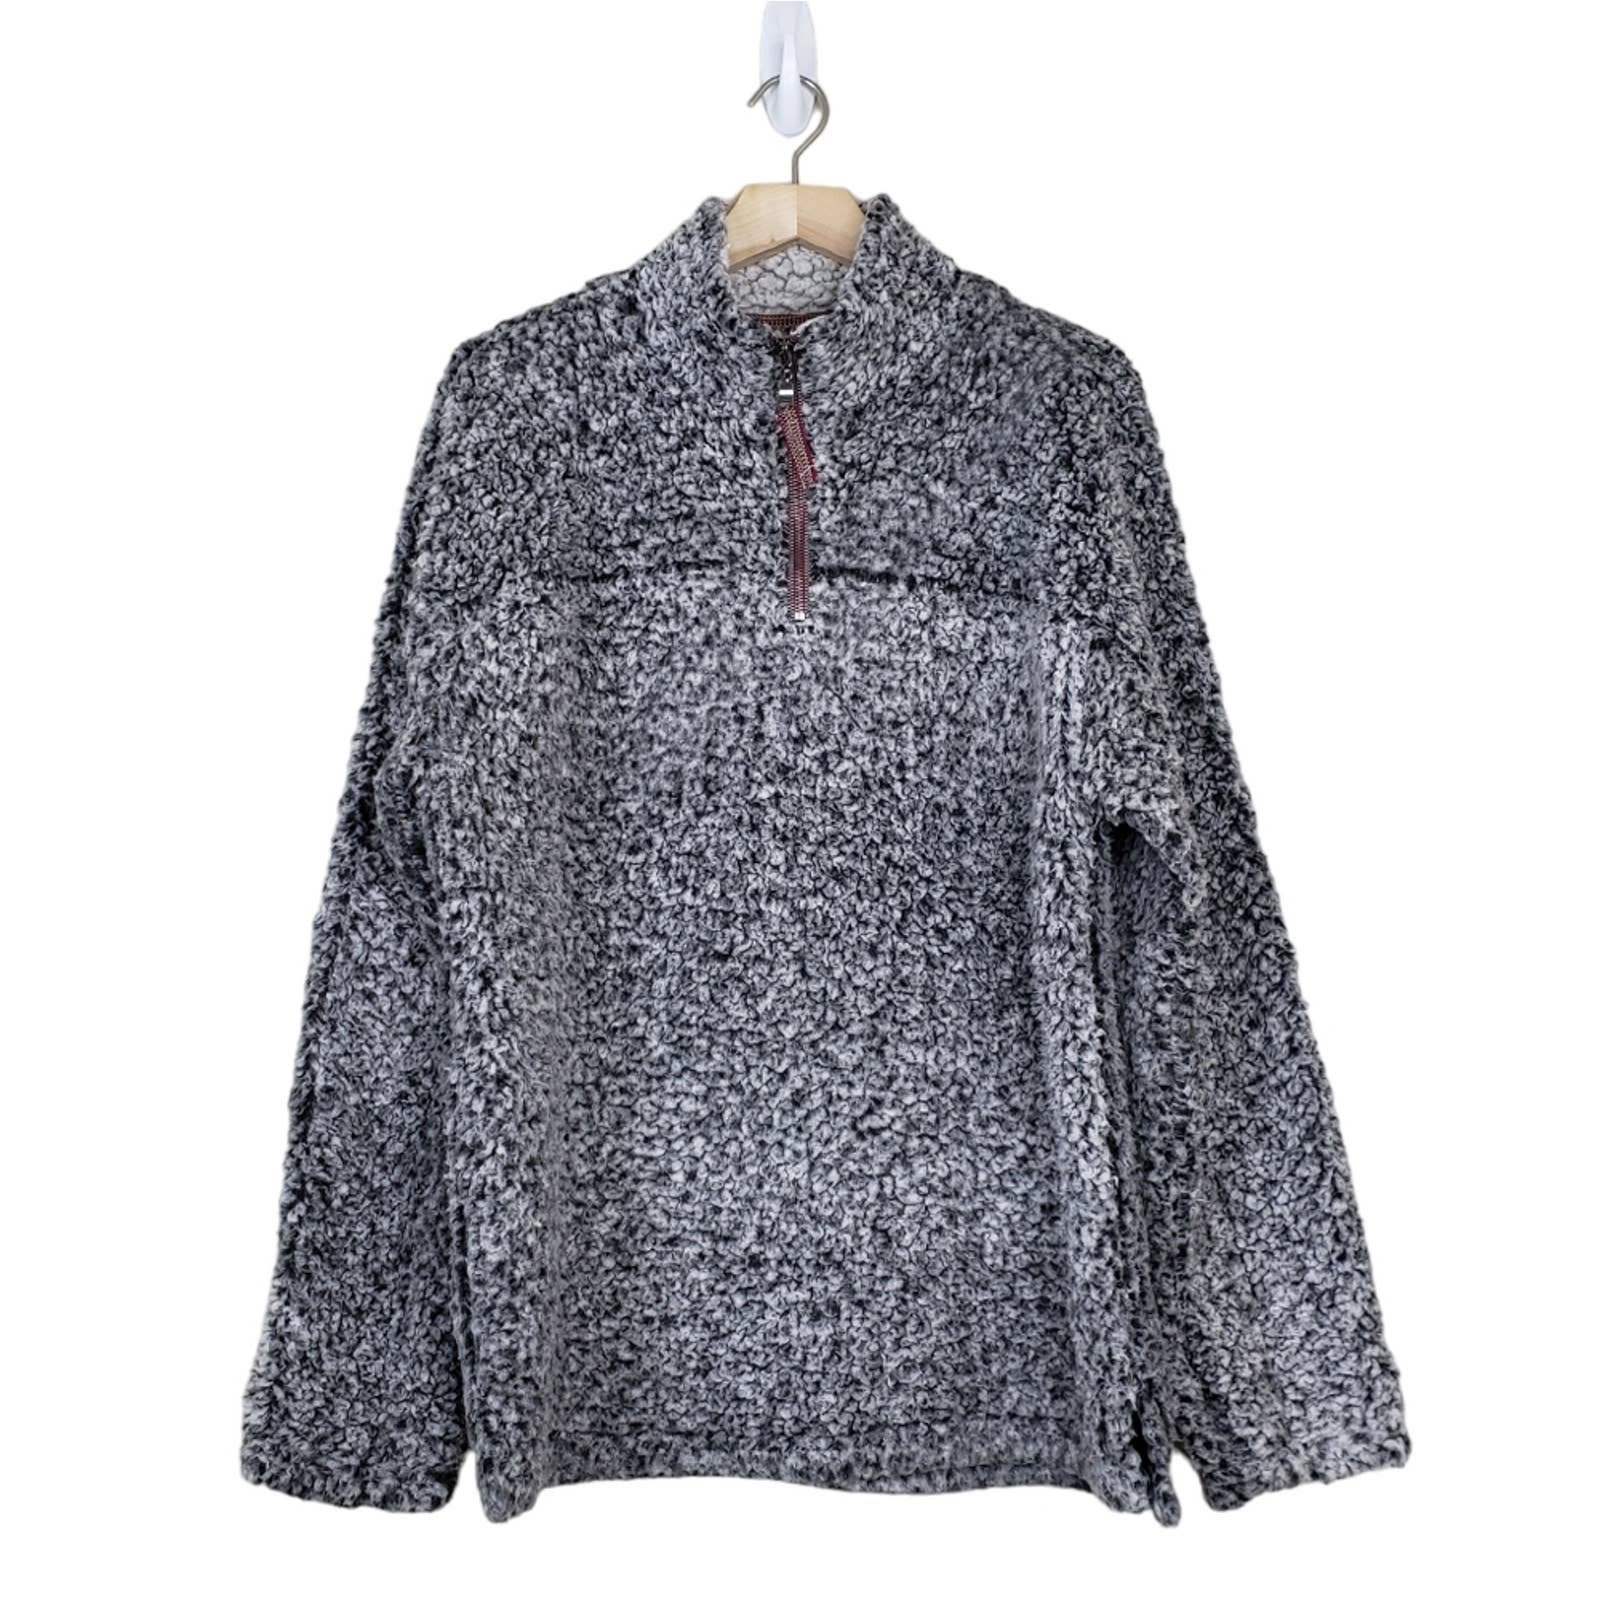 Fashion True Grit Original Small Frosty Tipped Pullover Jacket in Gray PDCiCYRas Hot Sale